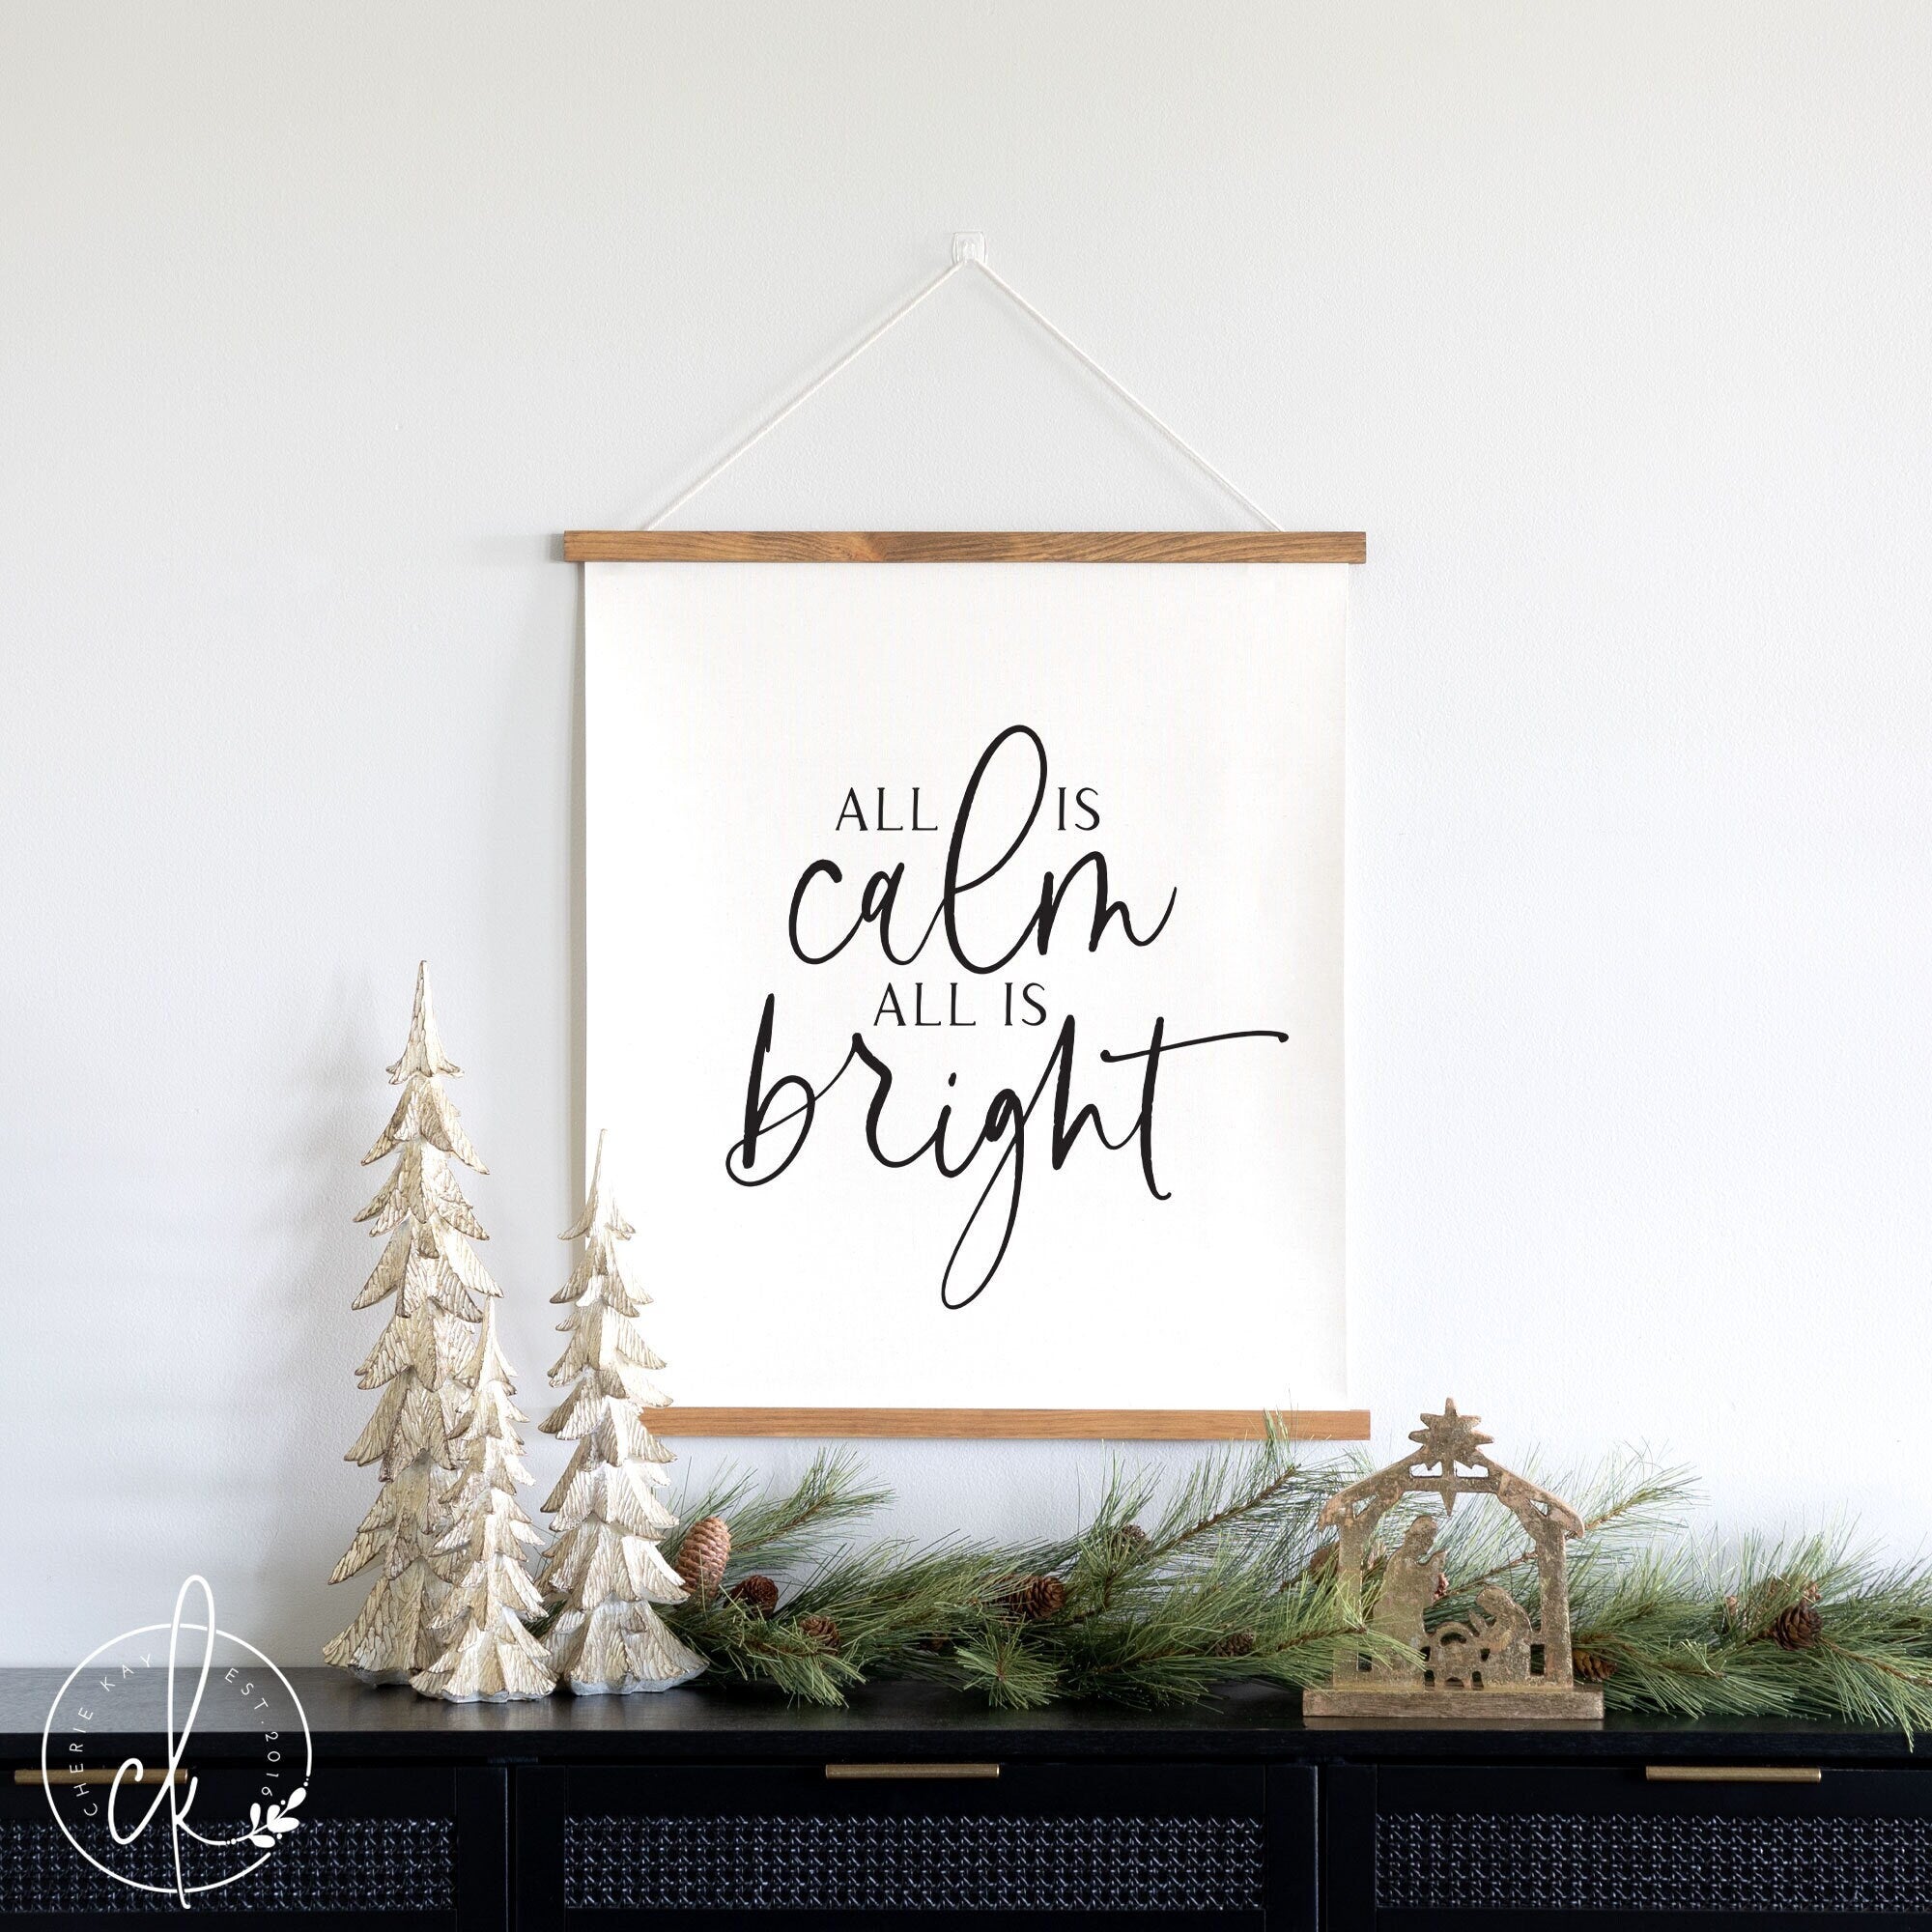 All Is Calm All Is Bright | Fabric Wall Hanging | Christmas Wall Decor | Holiday Decor | Farmhouse Christmas